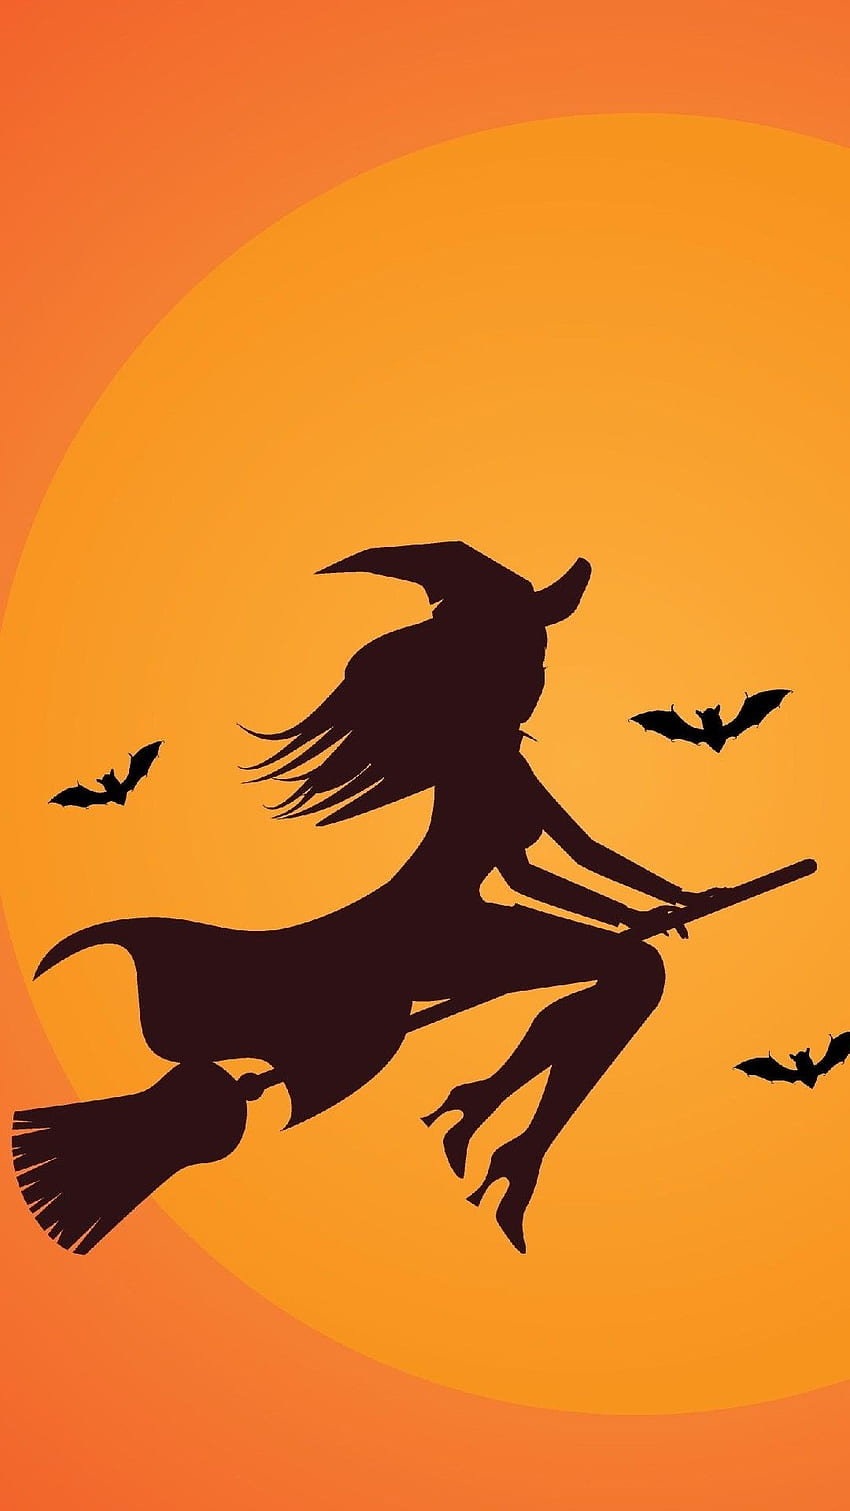 Halloween witch wallpaper Vector Image  1486816  StockUnlimited